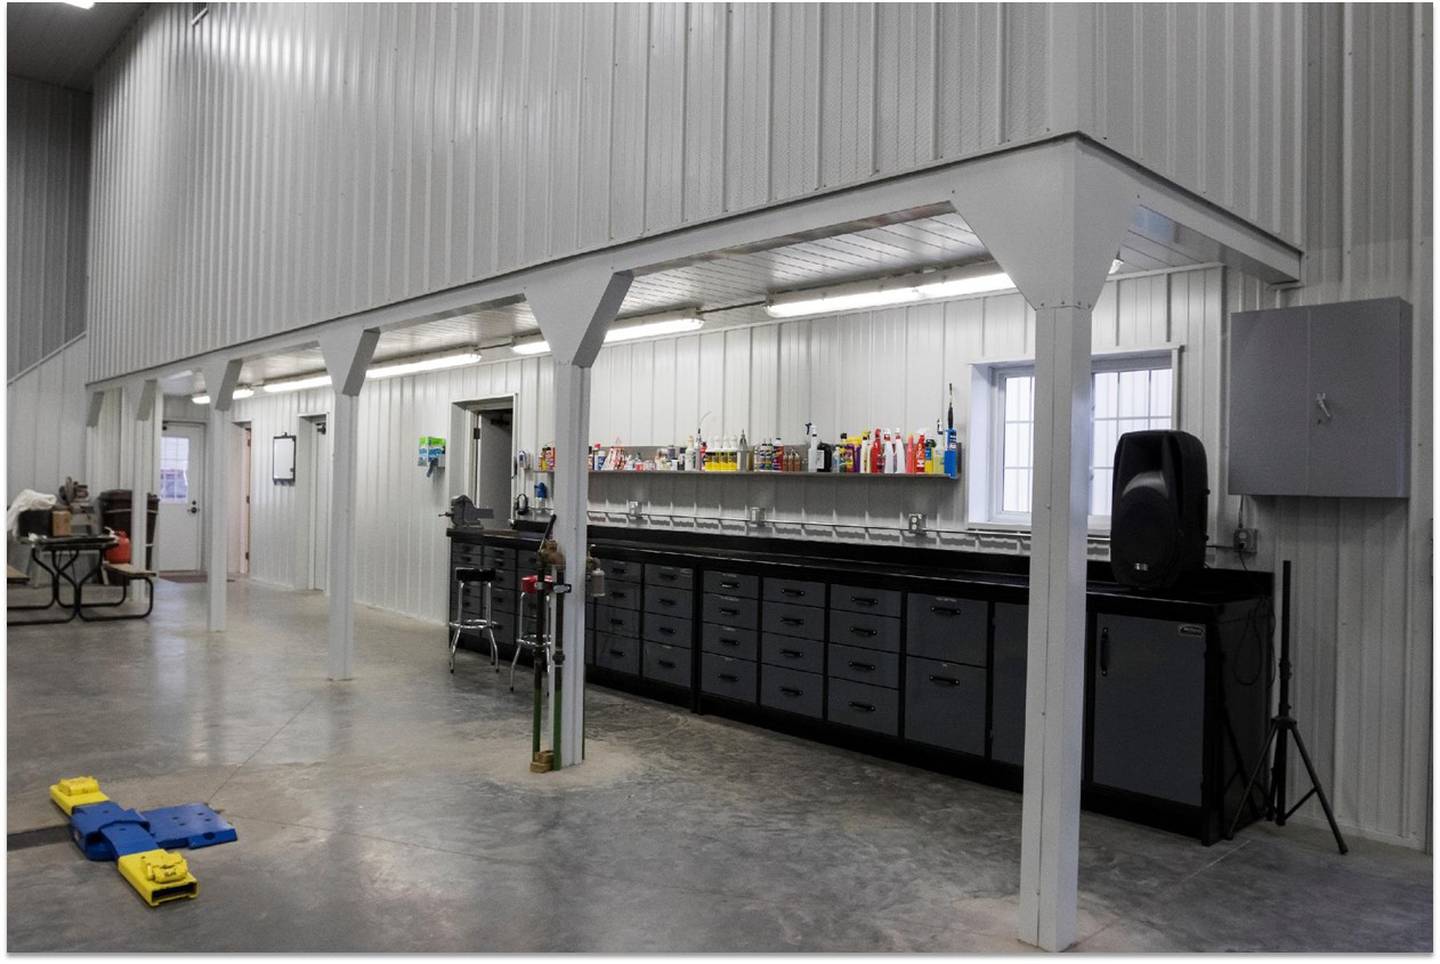 Morton Buildings offers insulated workshop designs for those cold winter months when there is still work to do.